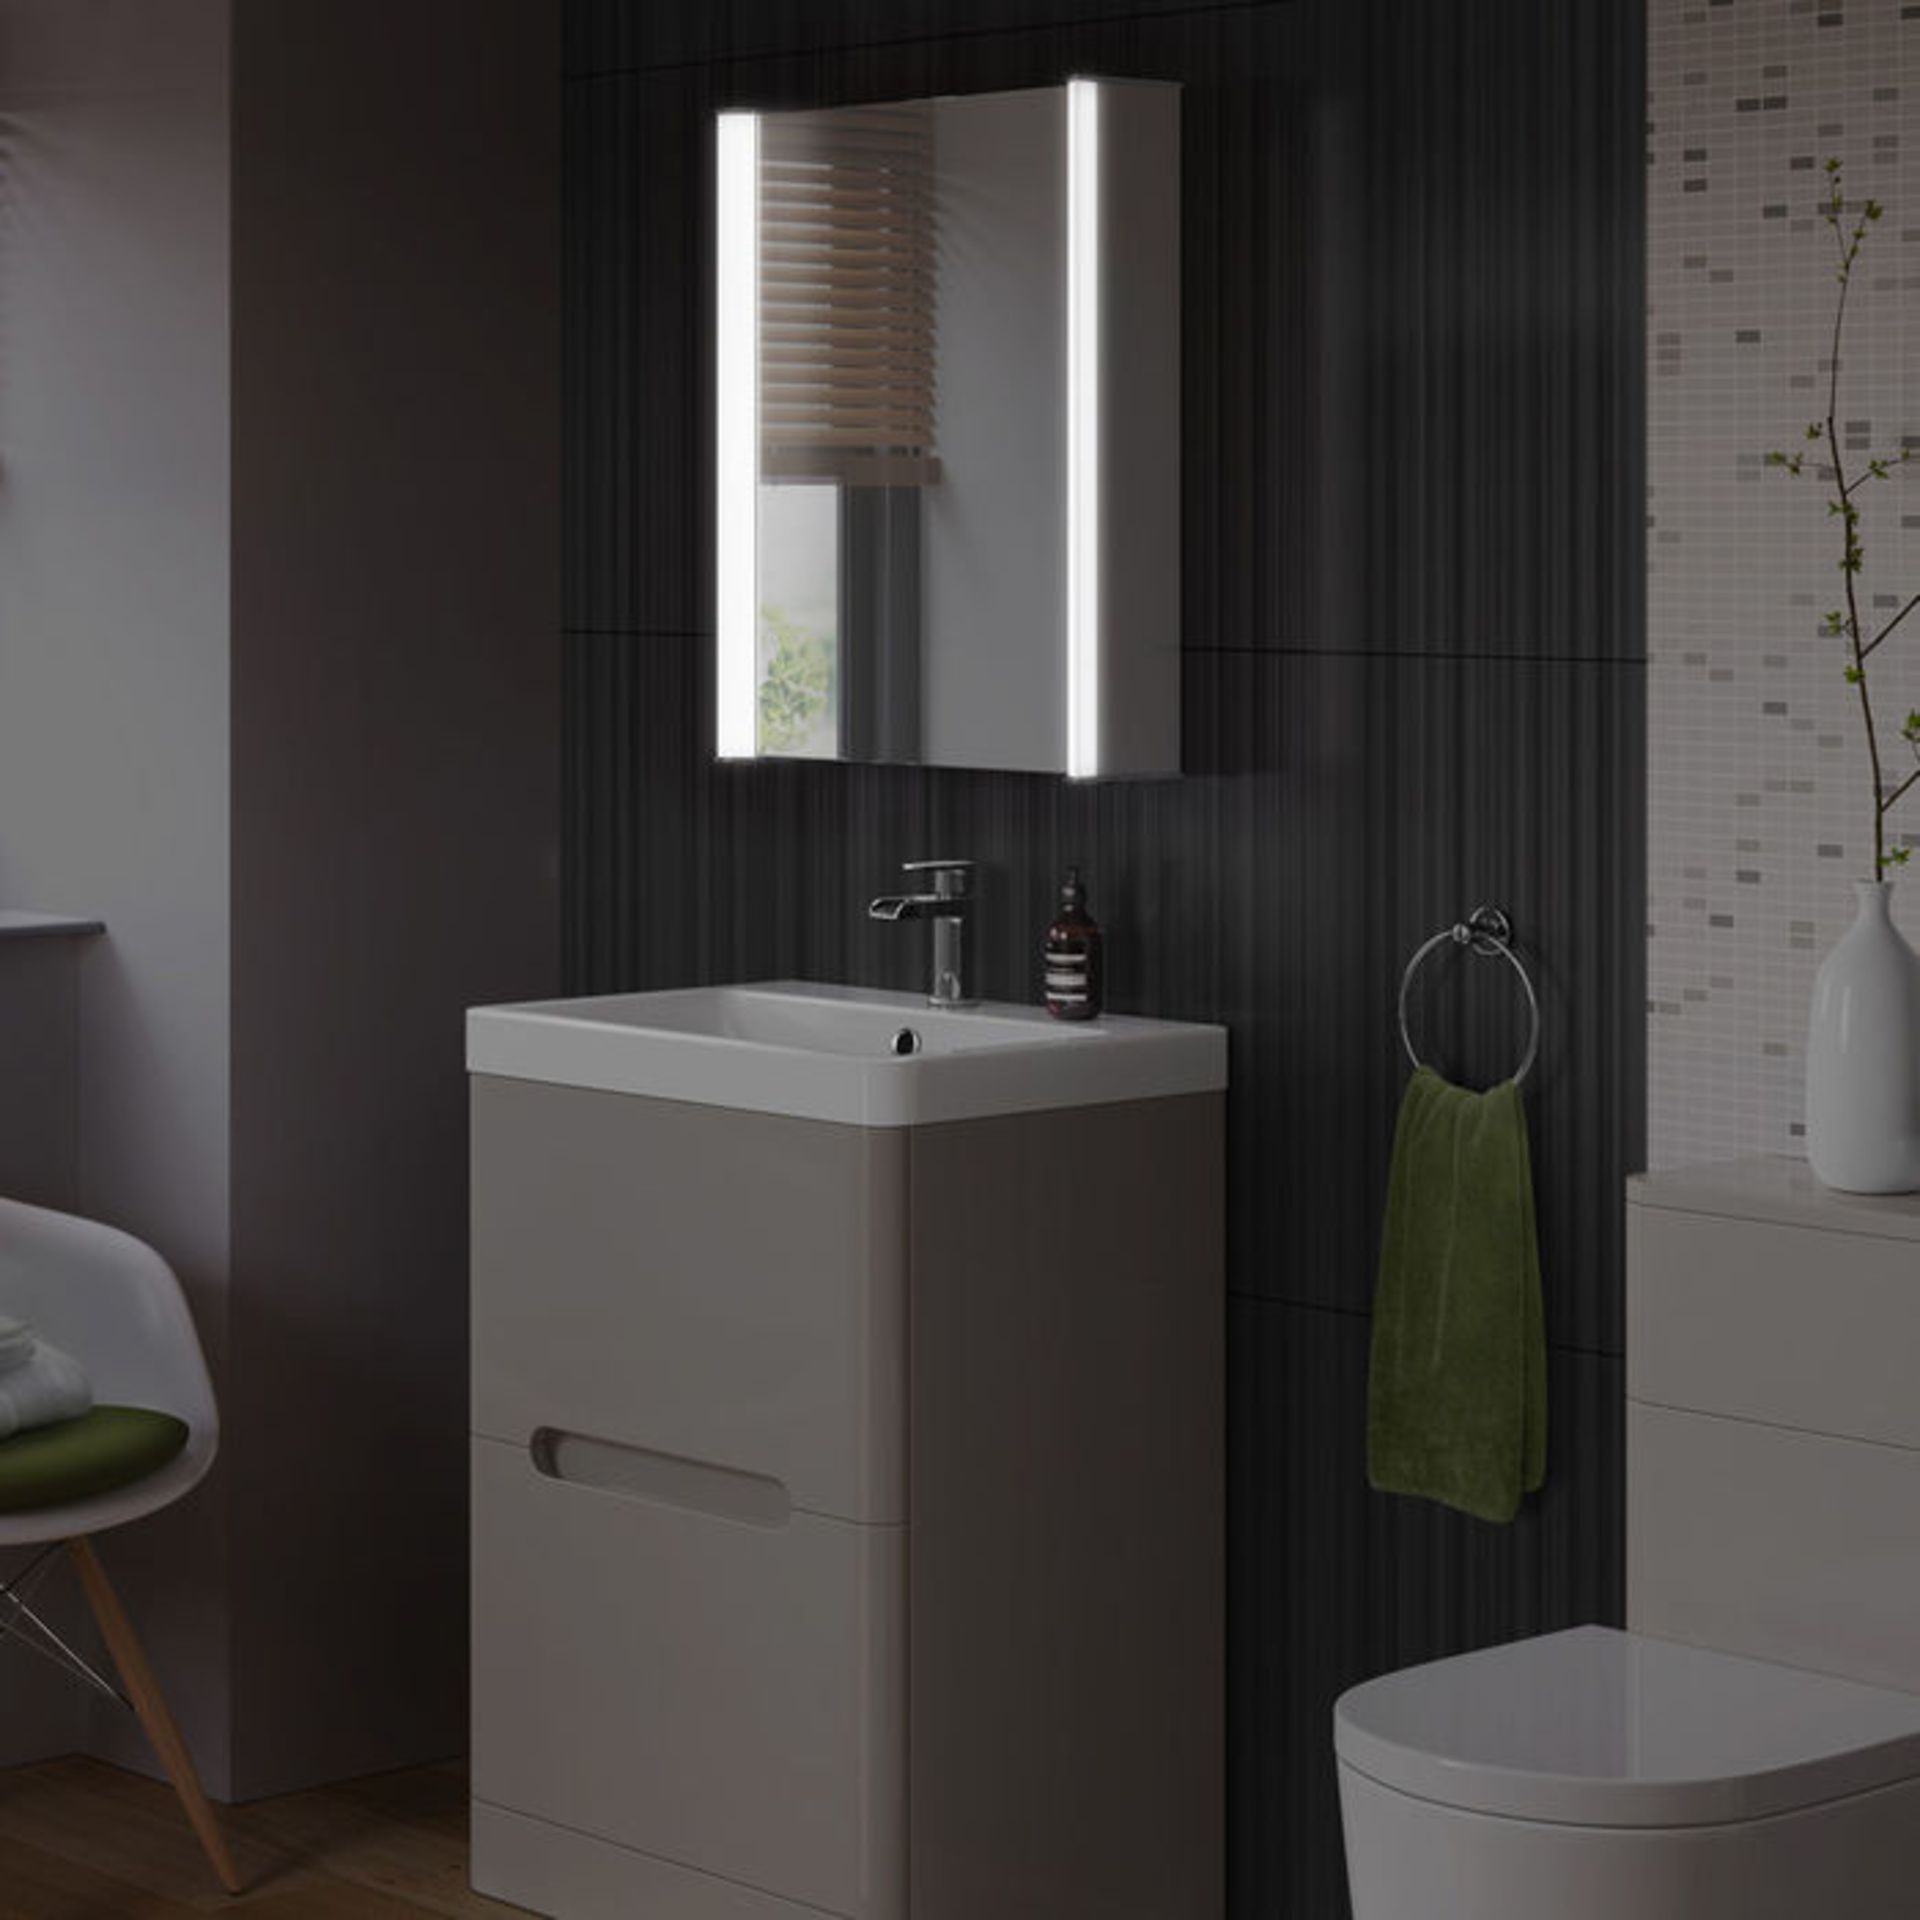 (DK41) 450x600mm Bloom Illuminated LED Mirror Cabinet - Shaver Socket. RRP £474.99. Double Sided - Image 2 of 4